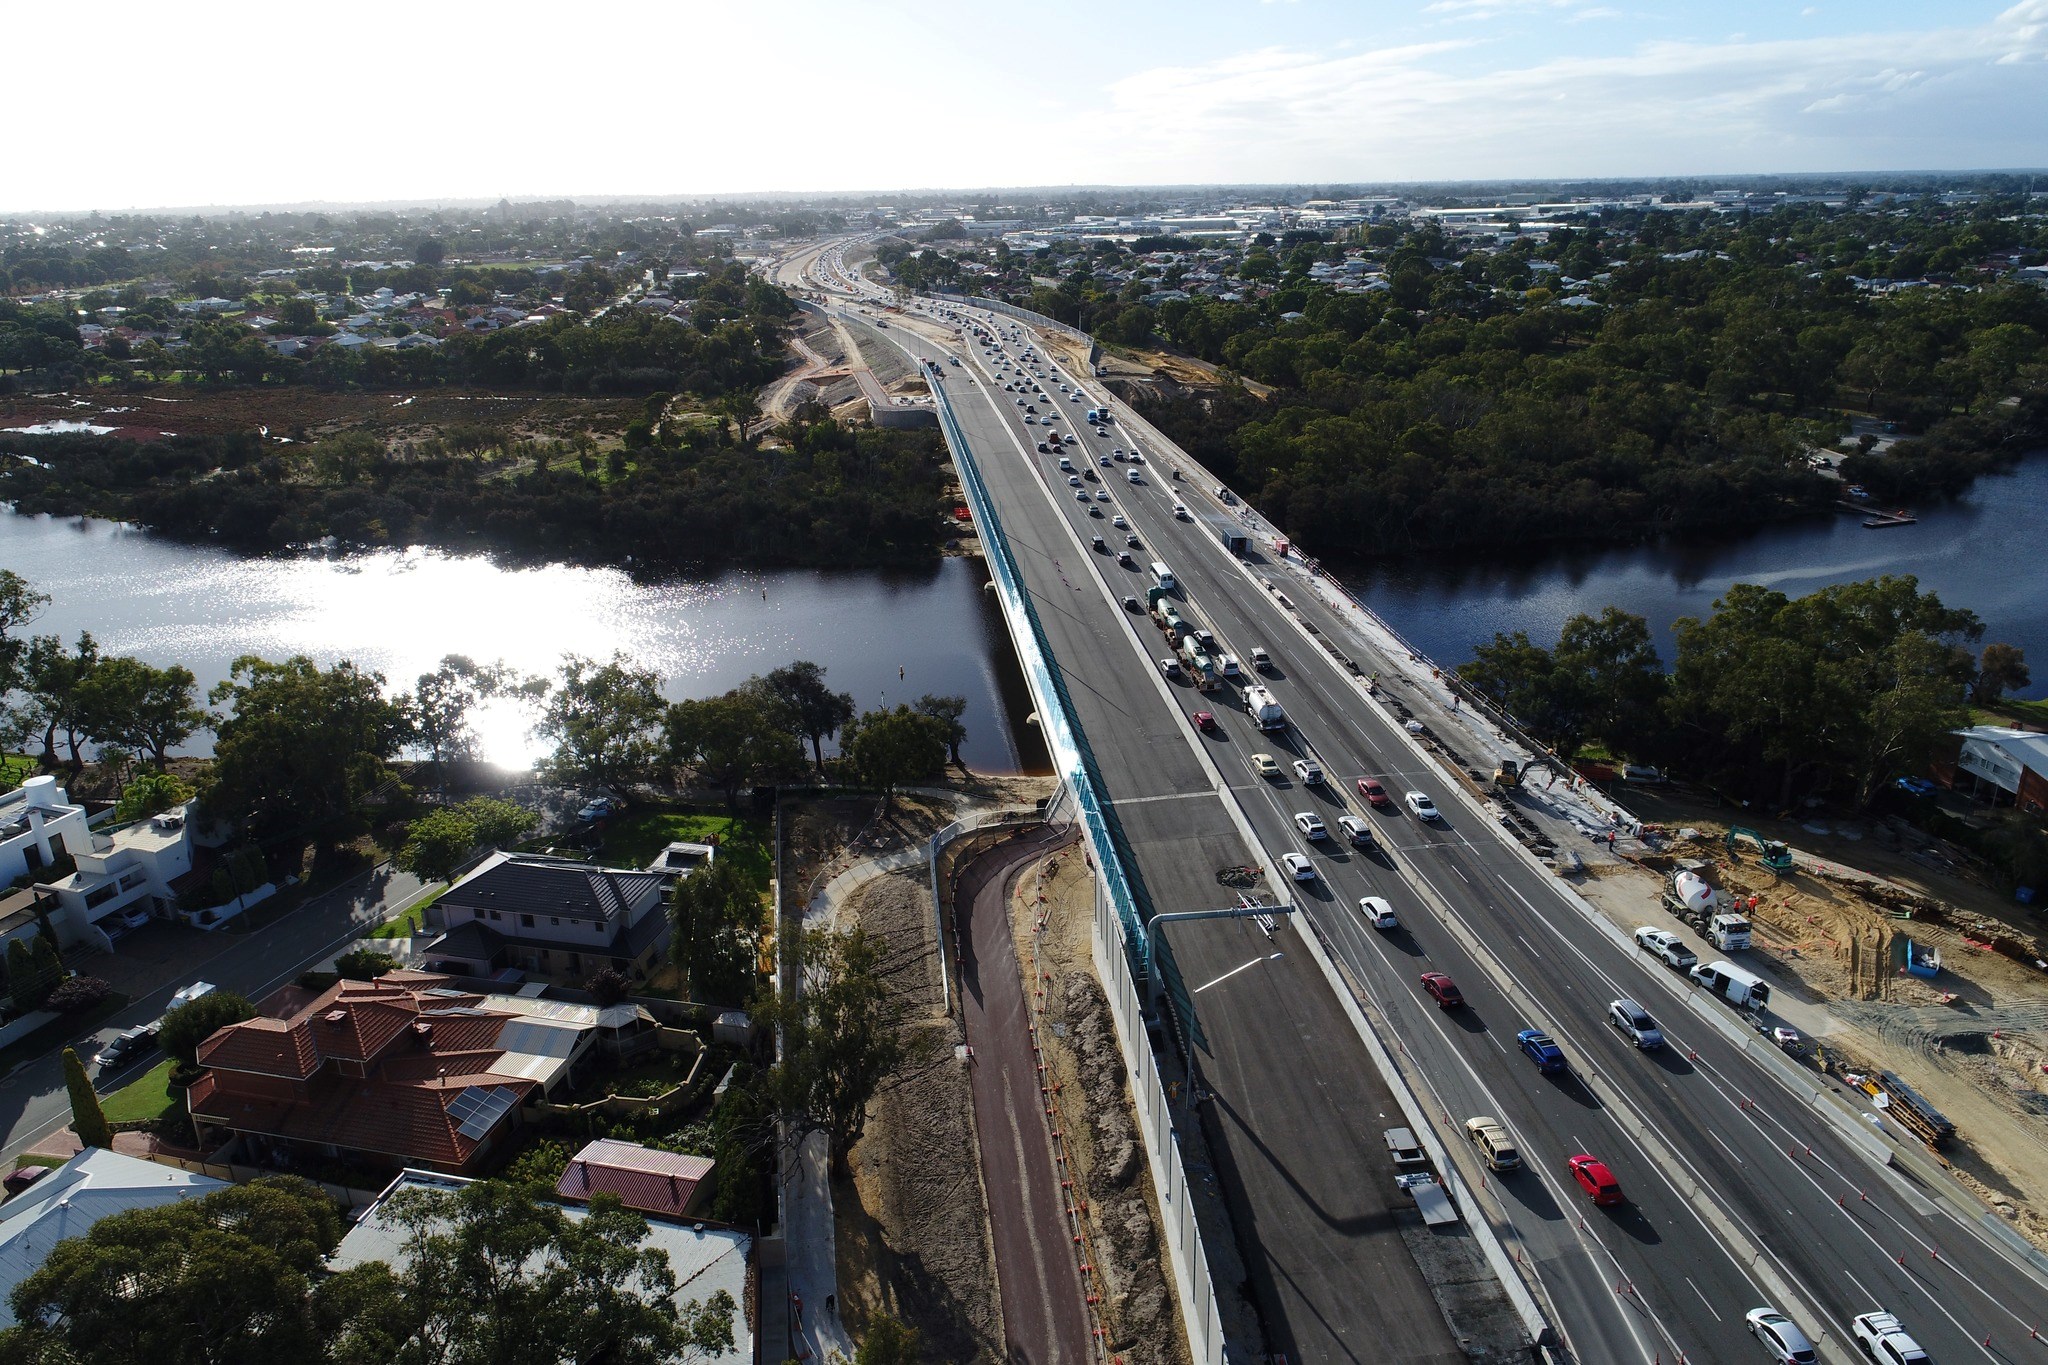 Arial photo of the Redcliffe Bridge - Tonkin Highway